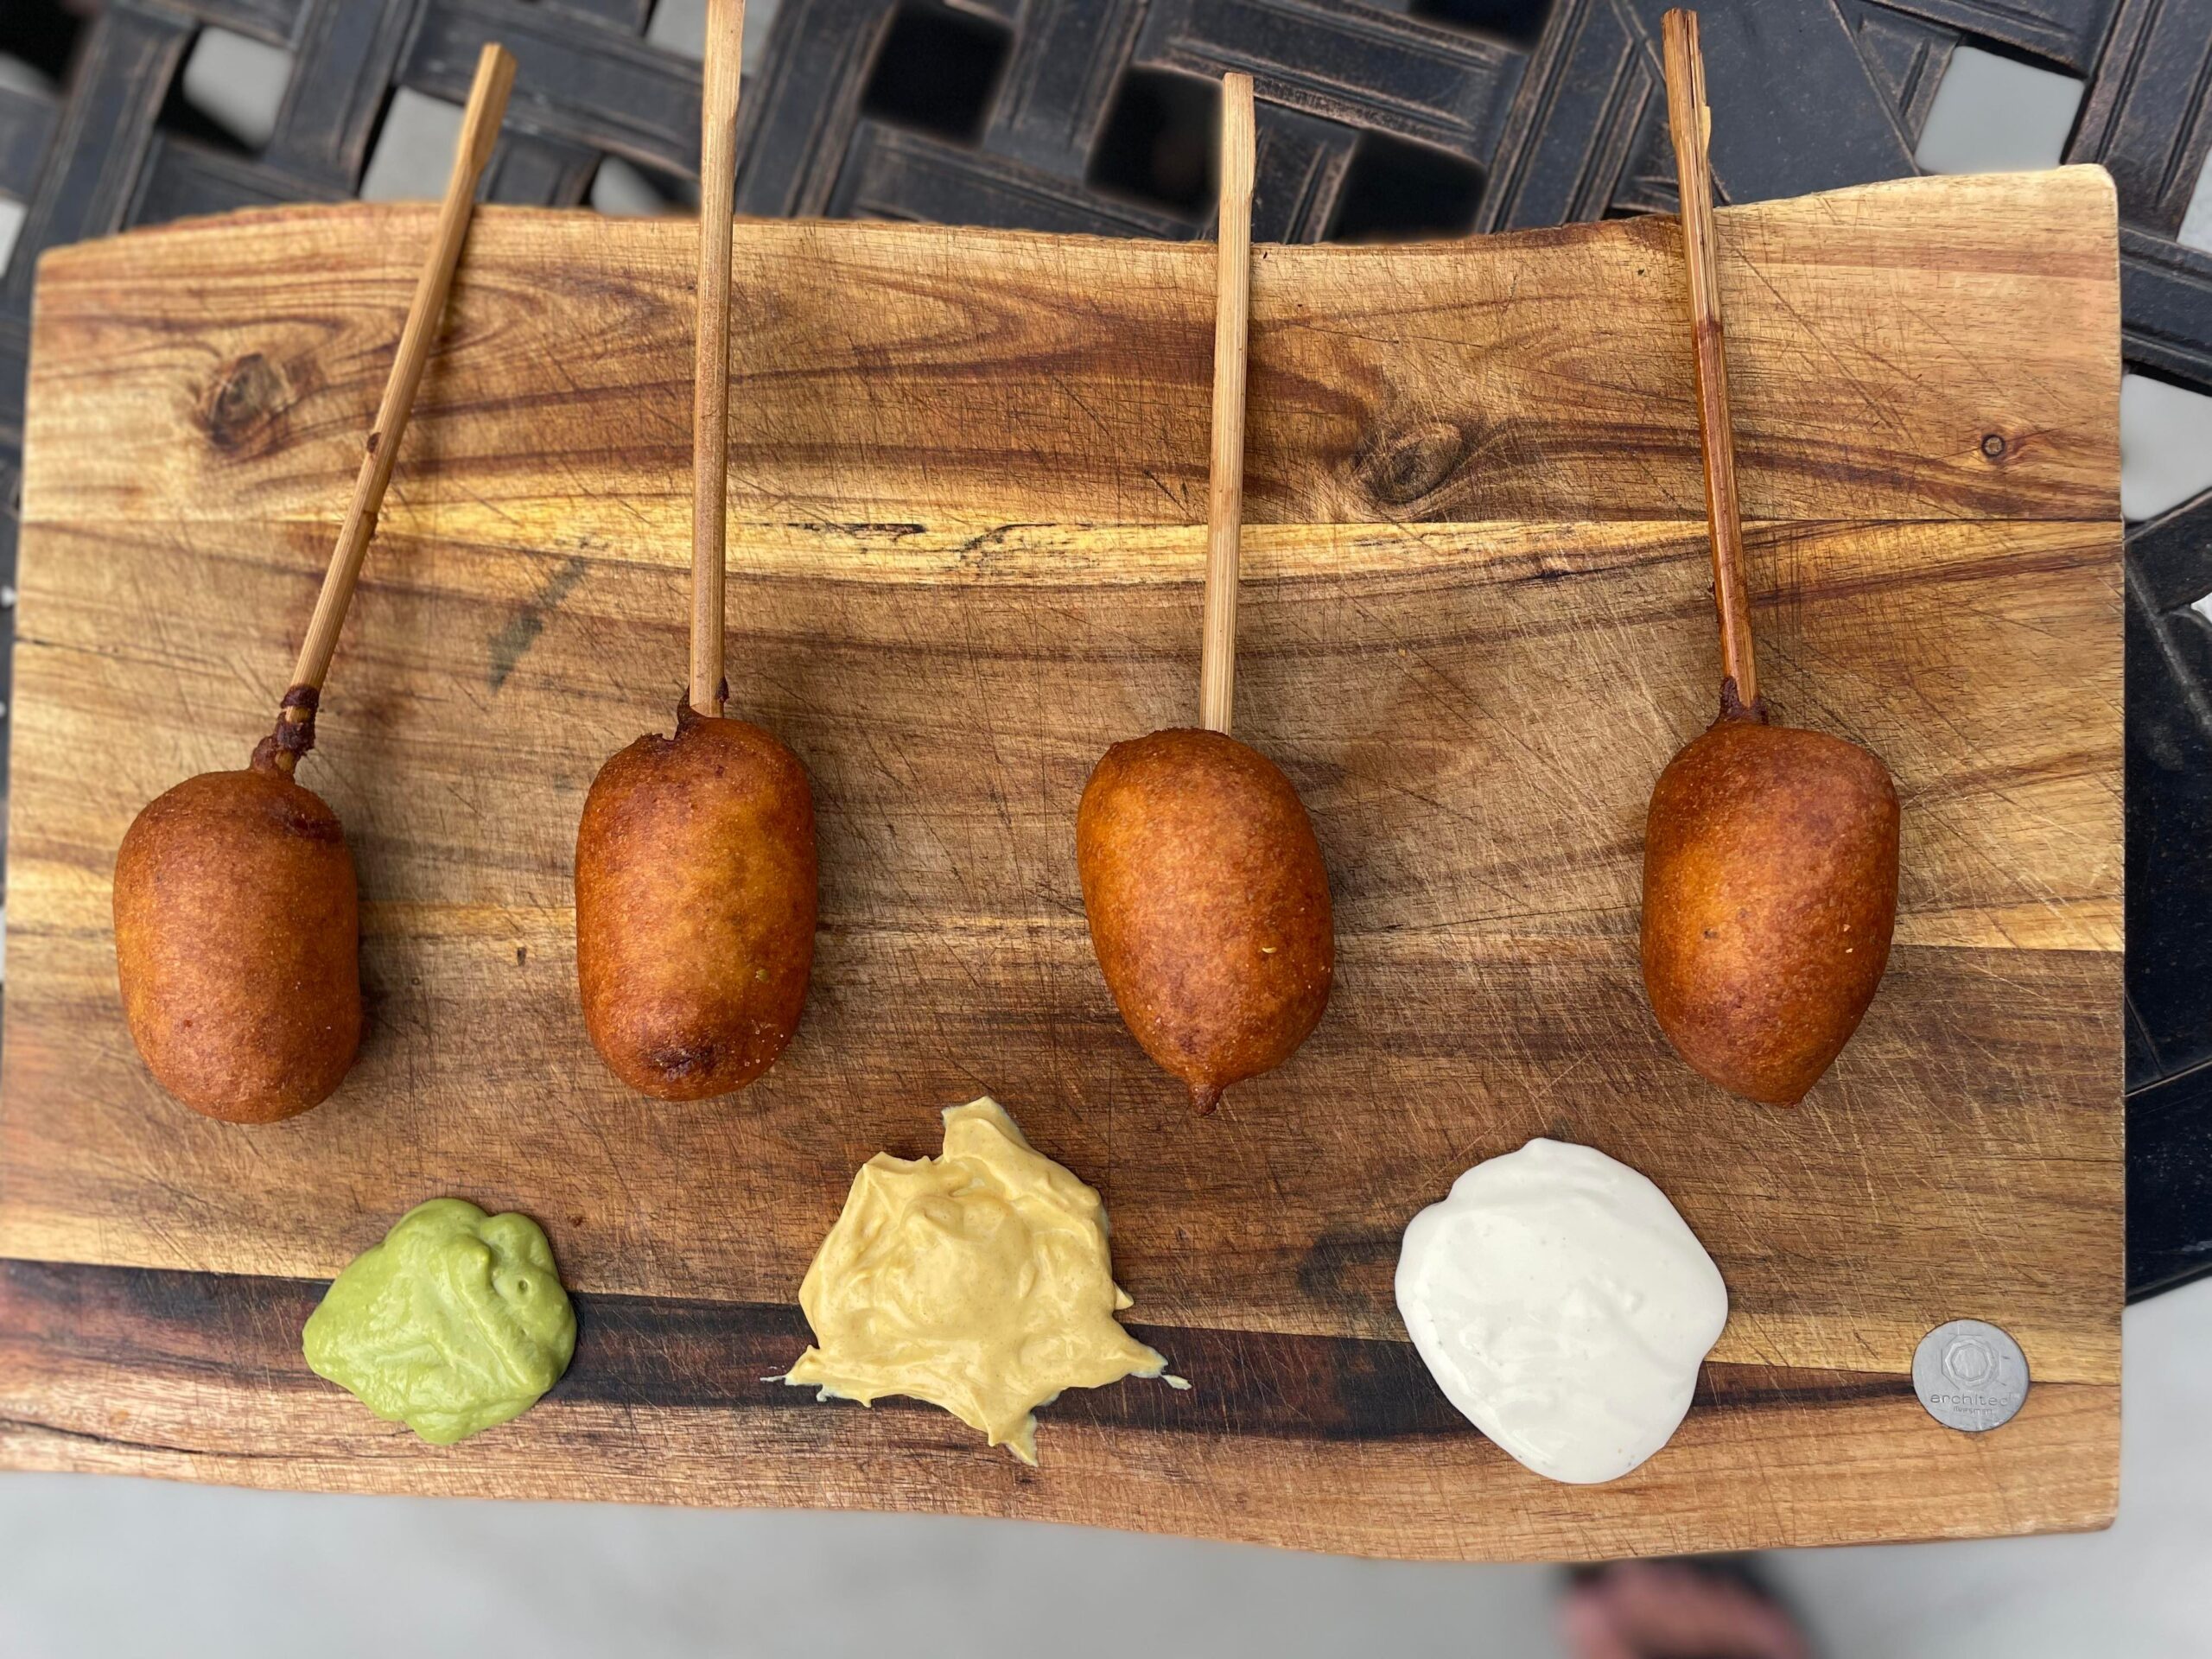 Gourmet corn dogs from Robbie's Gourmet Sausage Co. in Windsor, Ontaio.